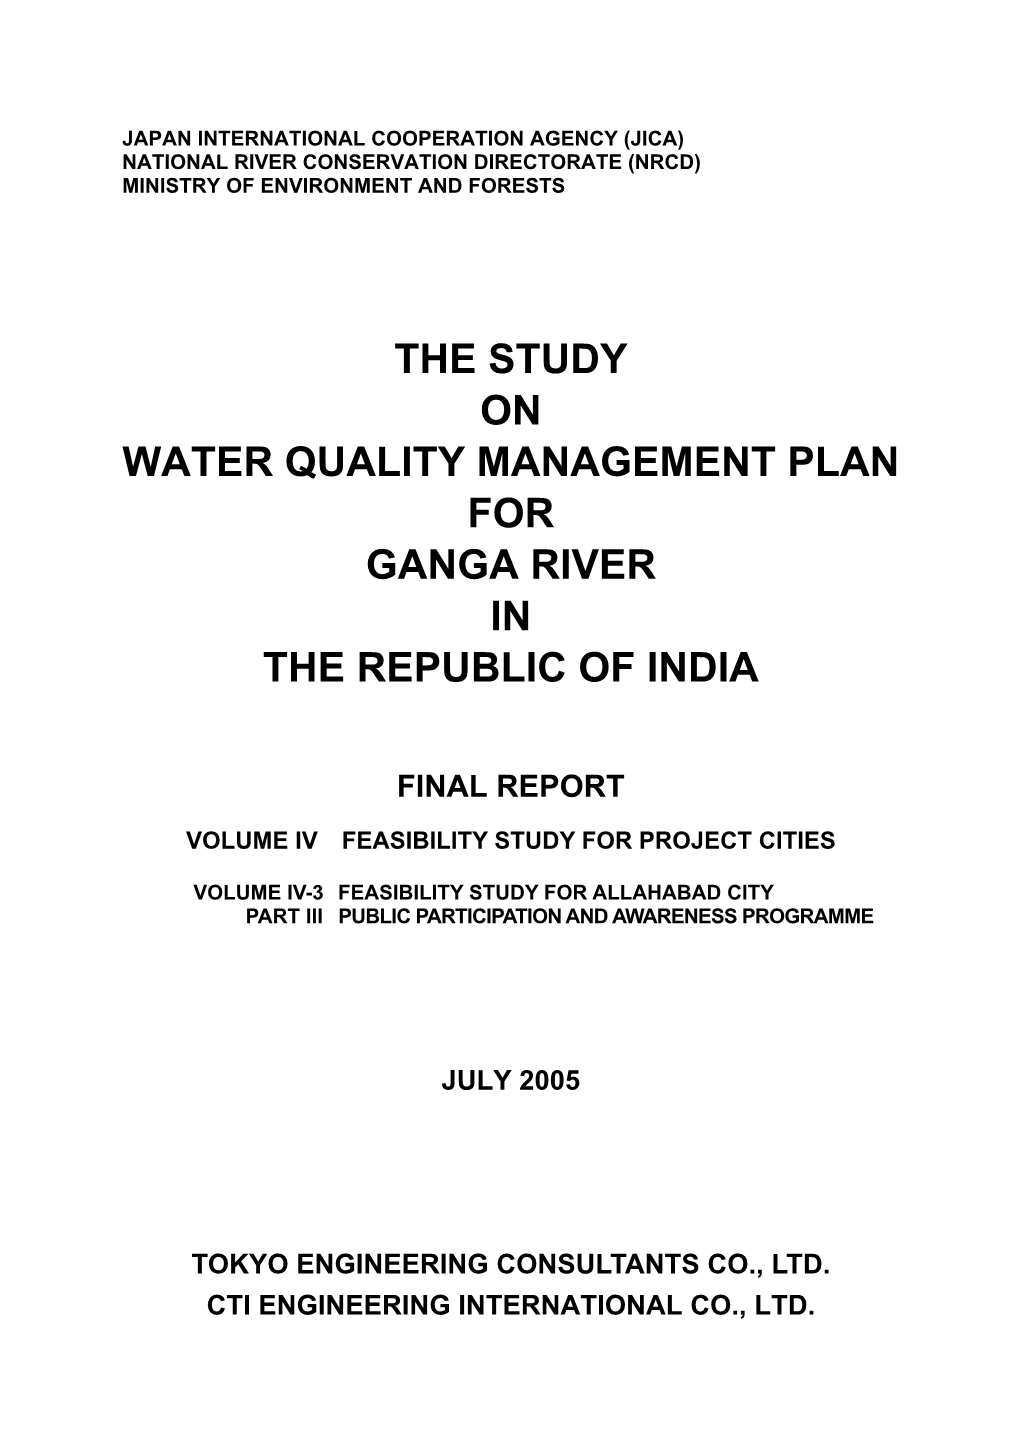 The Study on Water Quality Management Plan for Ganga River in the Republic of India